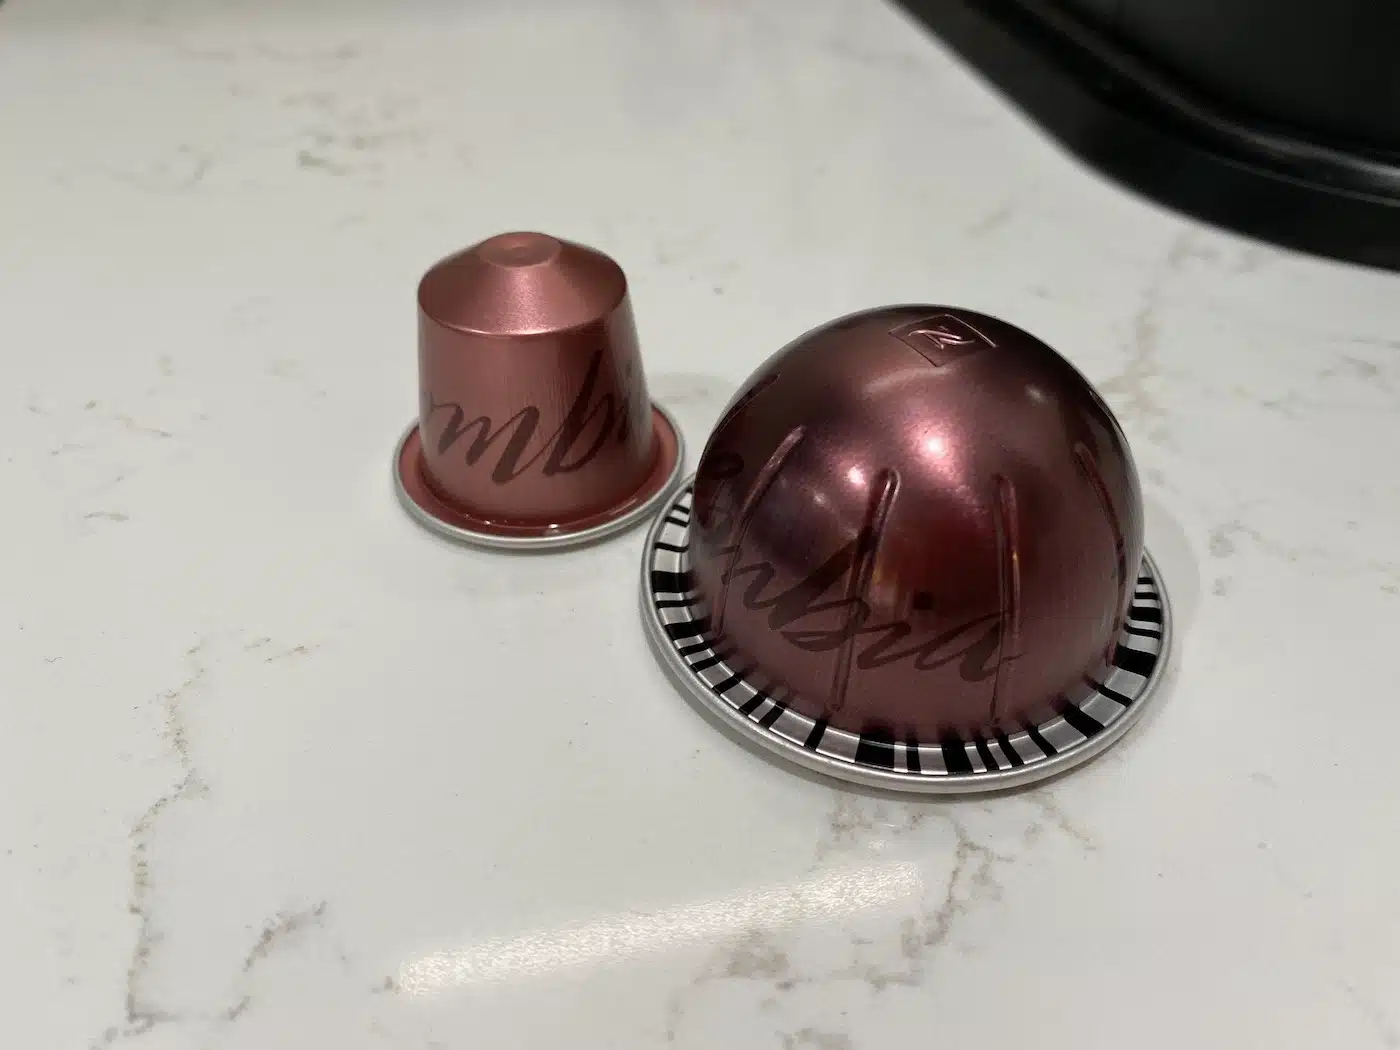 nespresso vertuo next, Original, whats the difference, whyhi